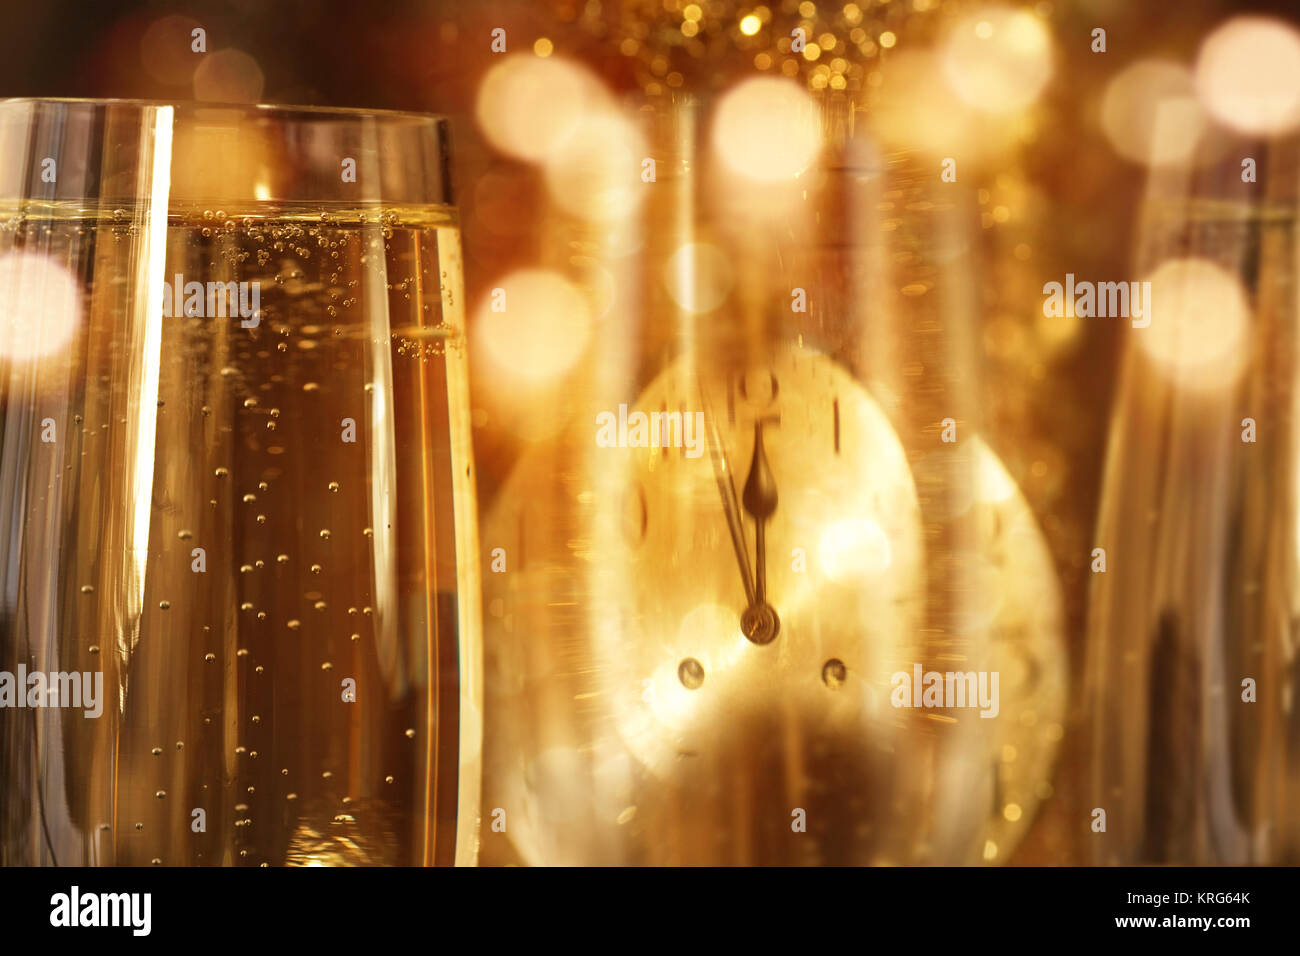 new year background with champagne Stock Photo